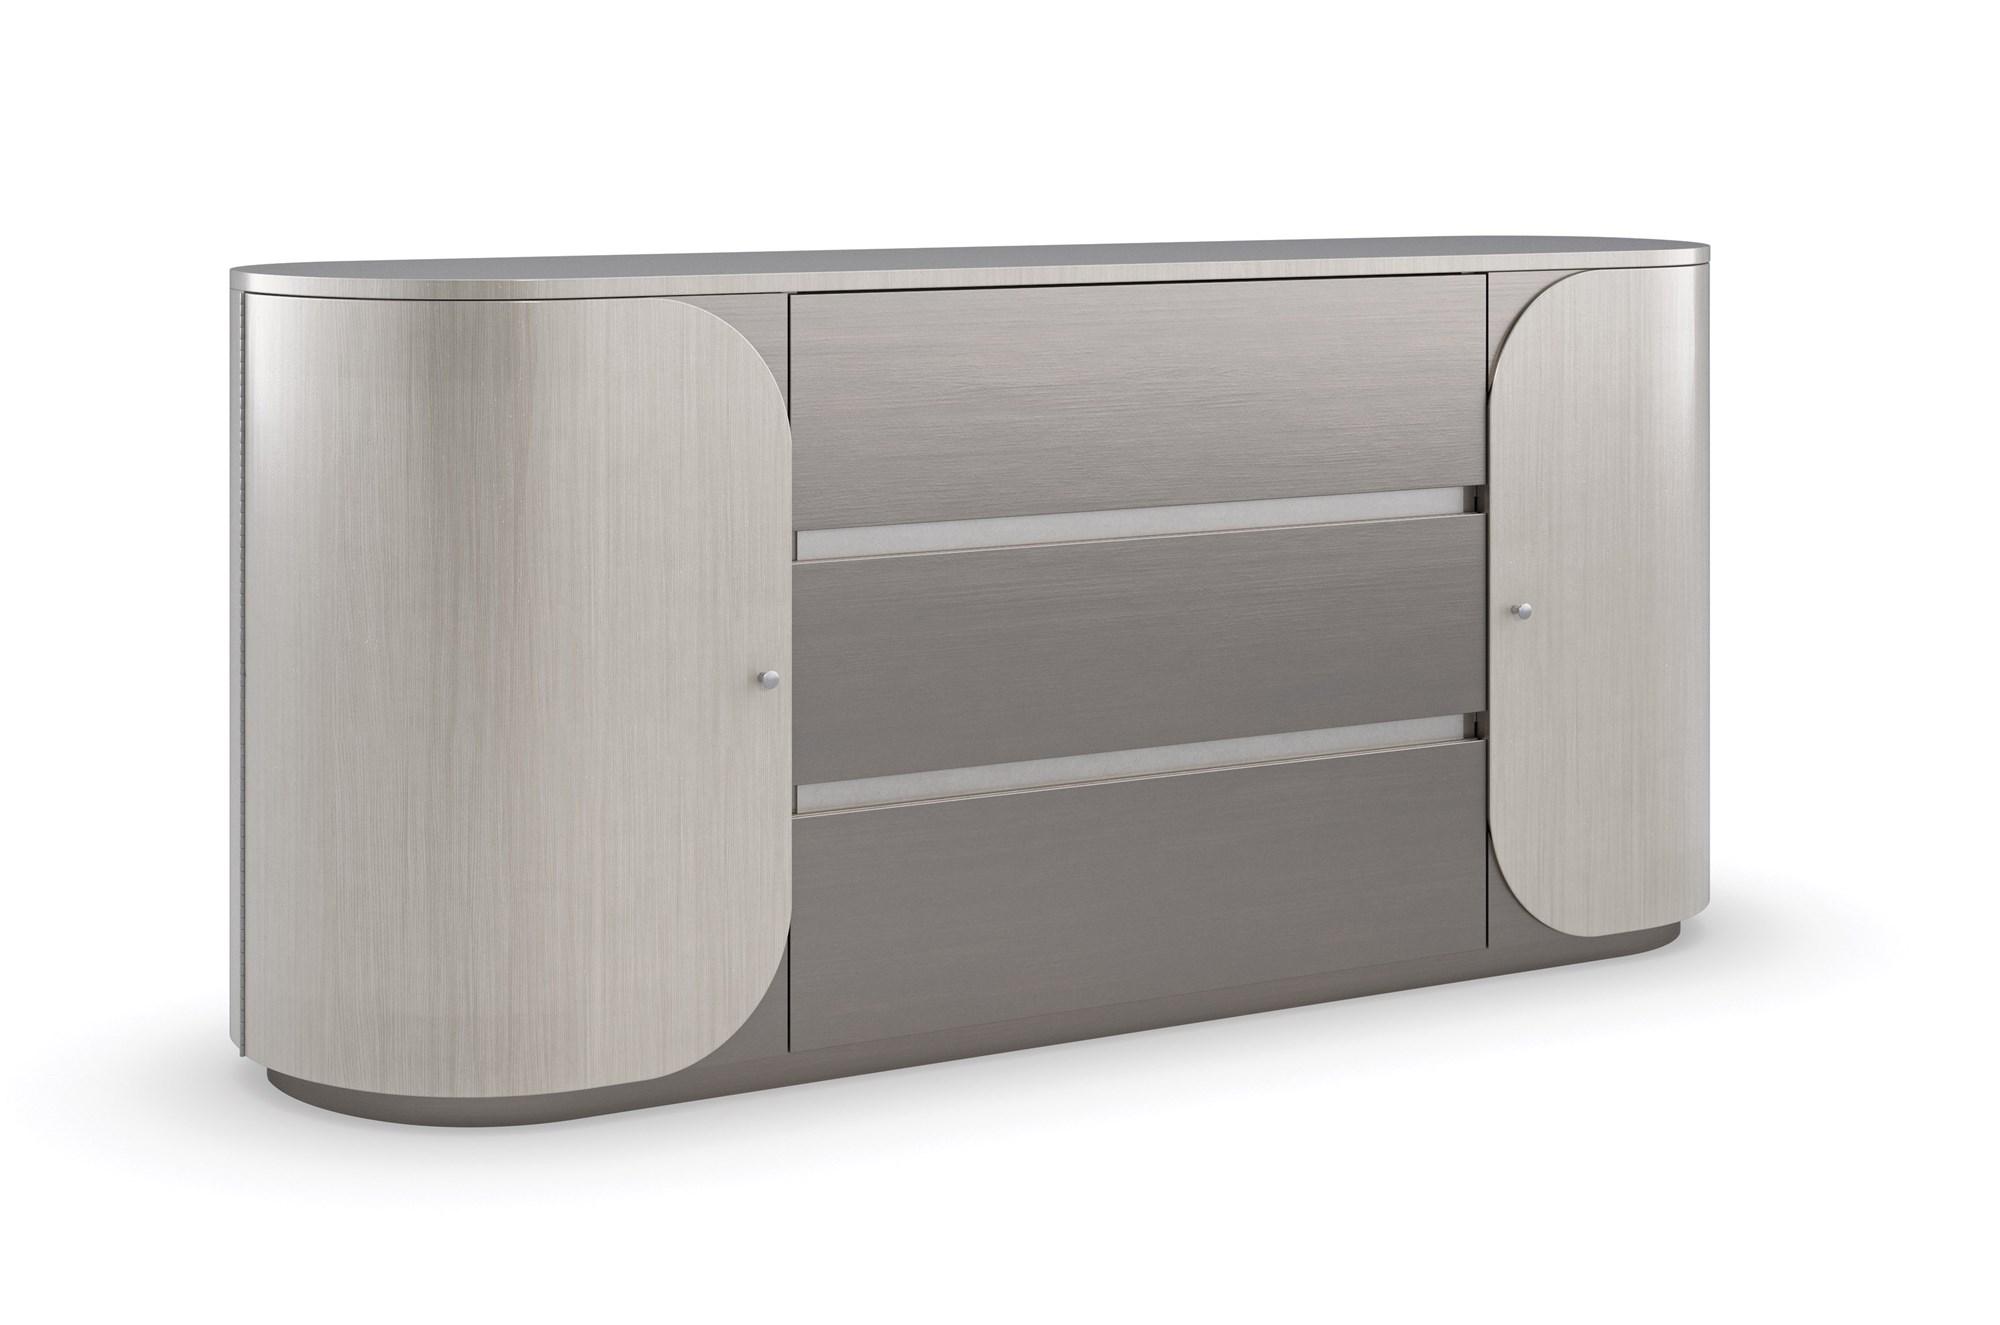 

    
Smoked Stainless Steel Paint Contemporary DA VITA DUO DRESSER ME by Caracole
